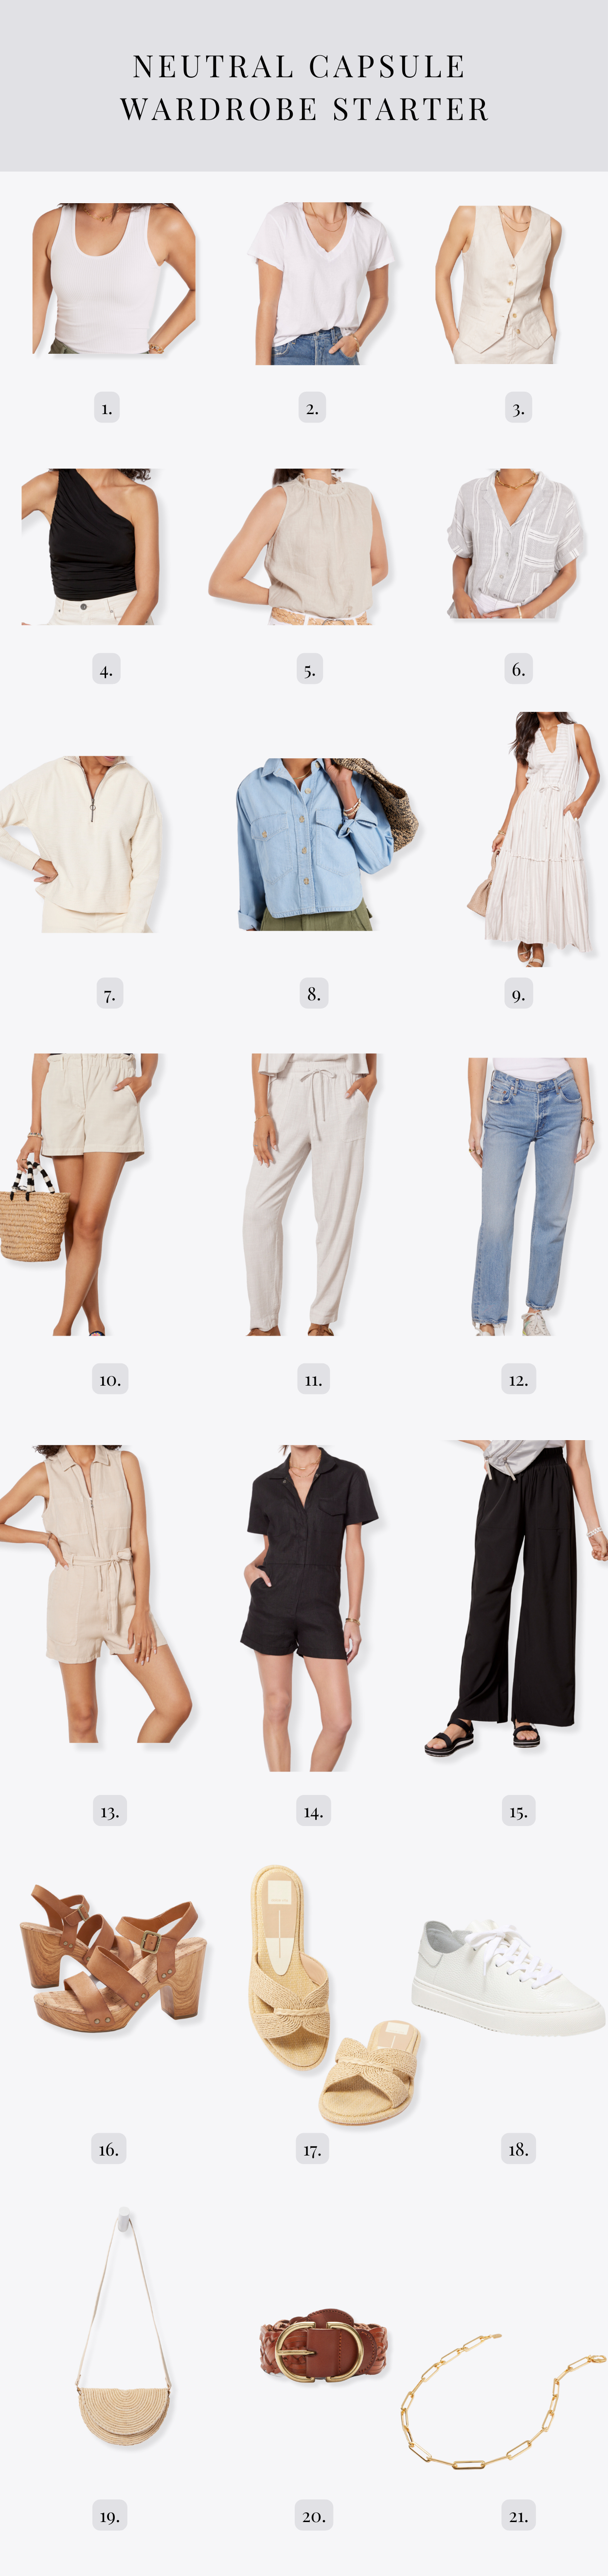 21 items to build a neutral capsule wardrobe